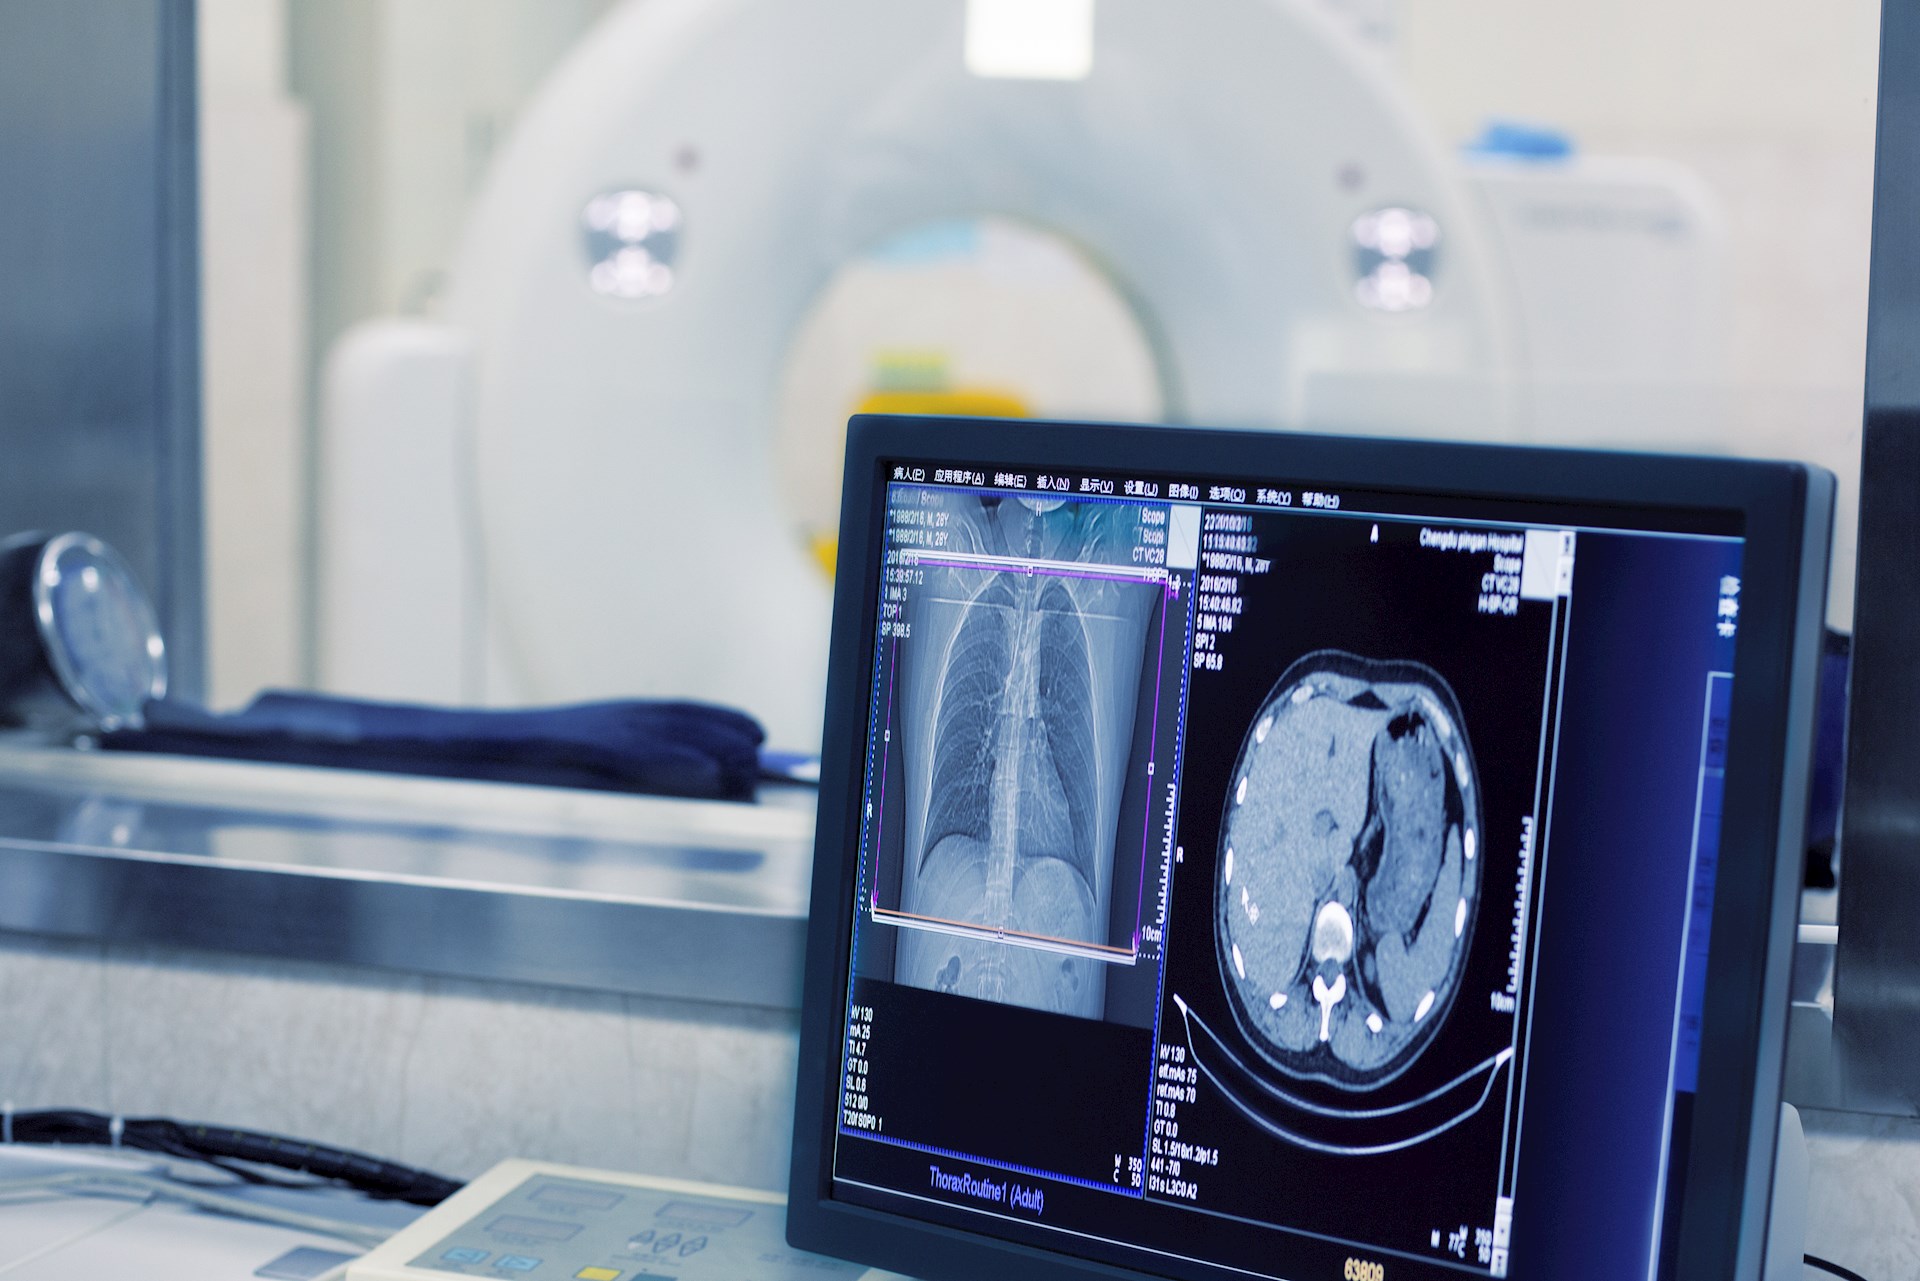 A critical world-wide shortage of contrast media used in imaging services will impact WellSpan patients who have certain scheduled outpatient CT imaging studies through mid-July. Patients should contact their provider about alternatives to contrasted CT scans.